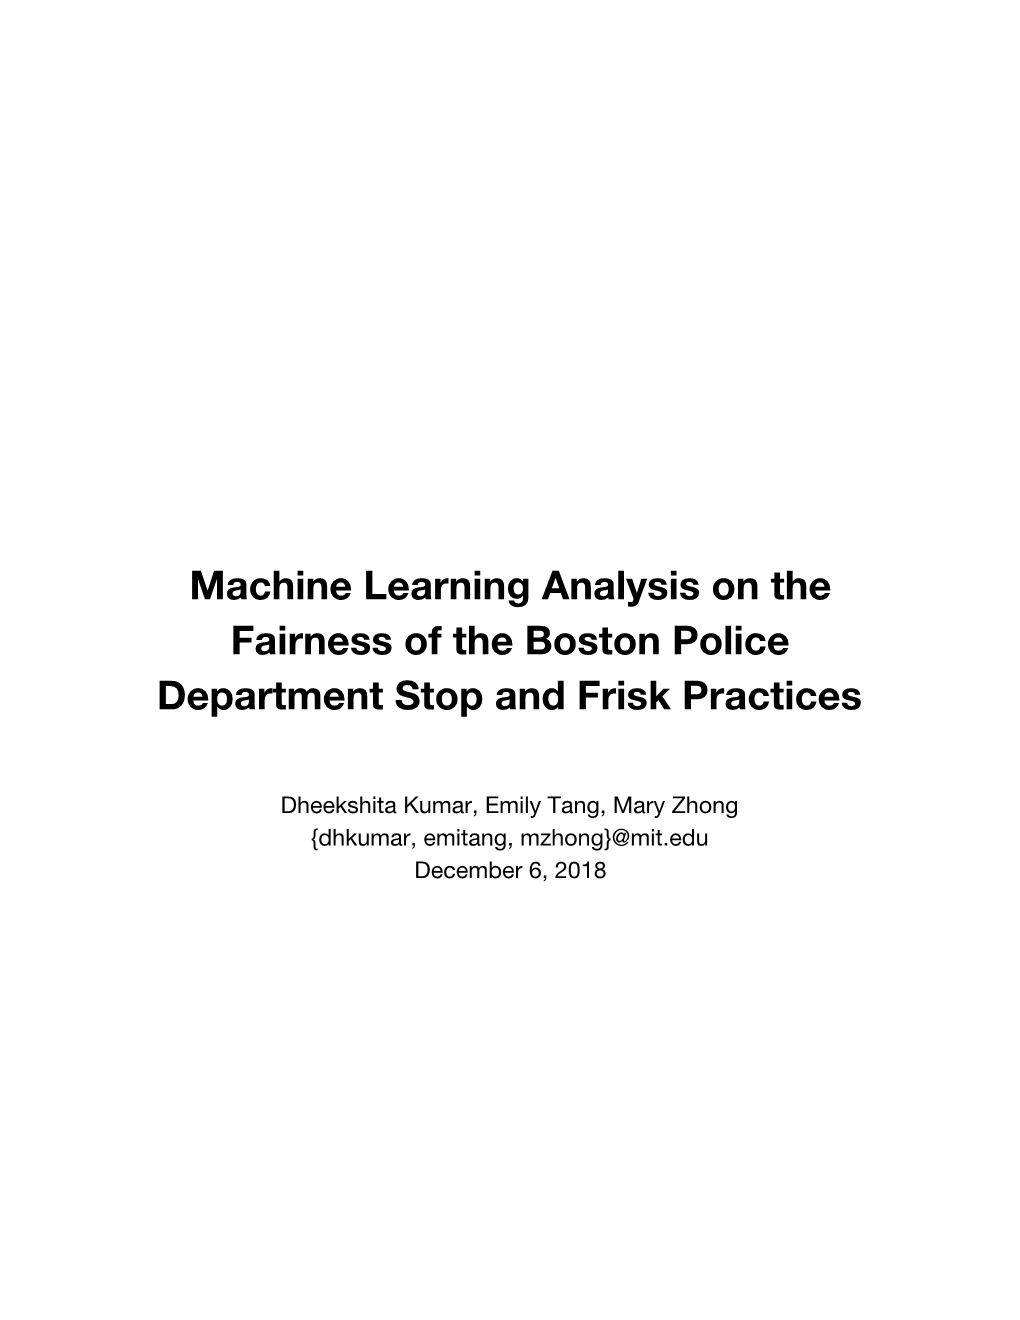 Machine Learning Analysis on the Fairness of the Boston Police Department Stop and Frisk Practices